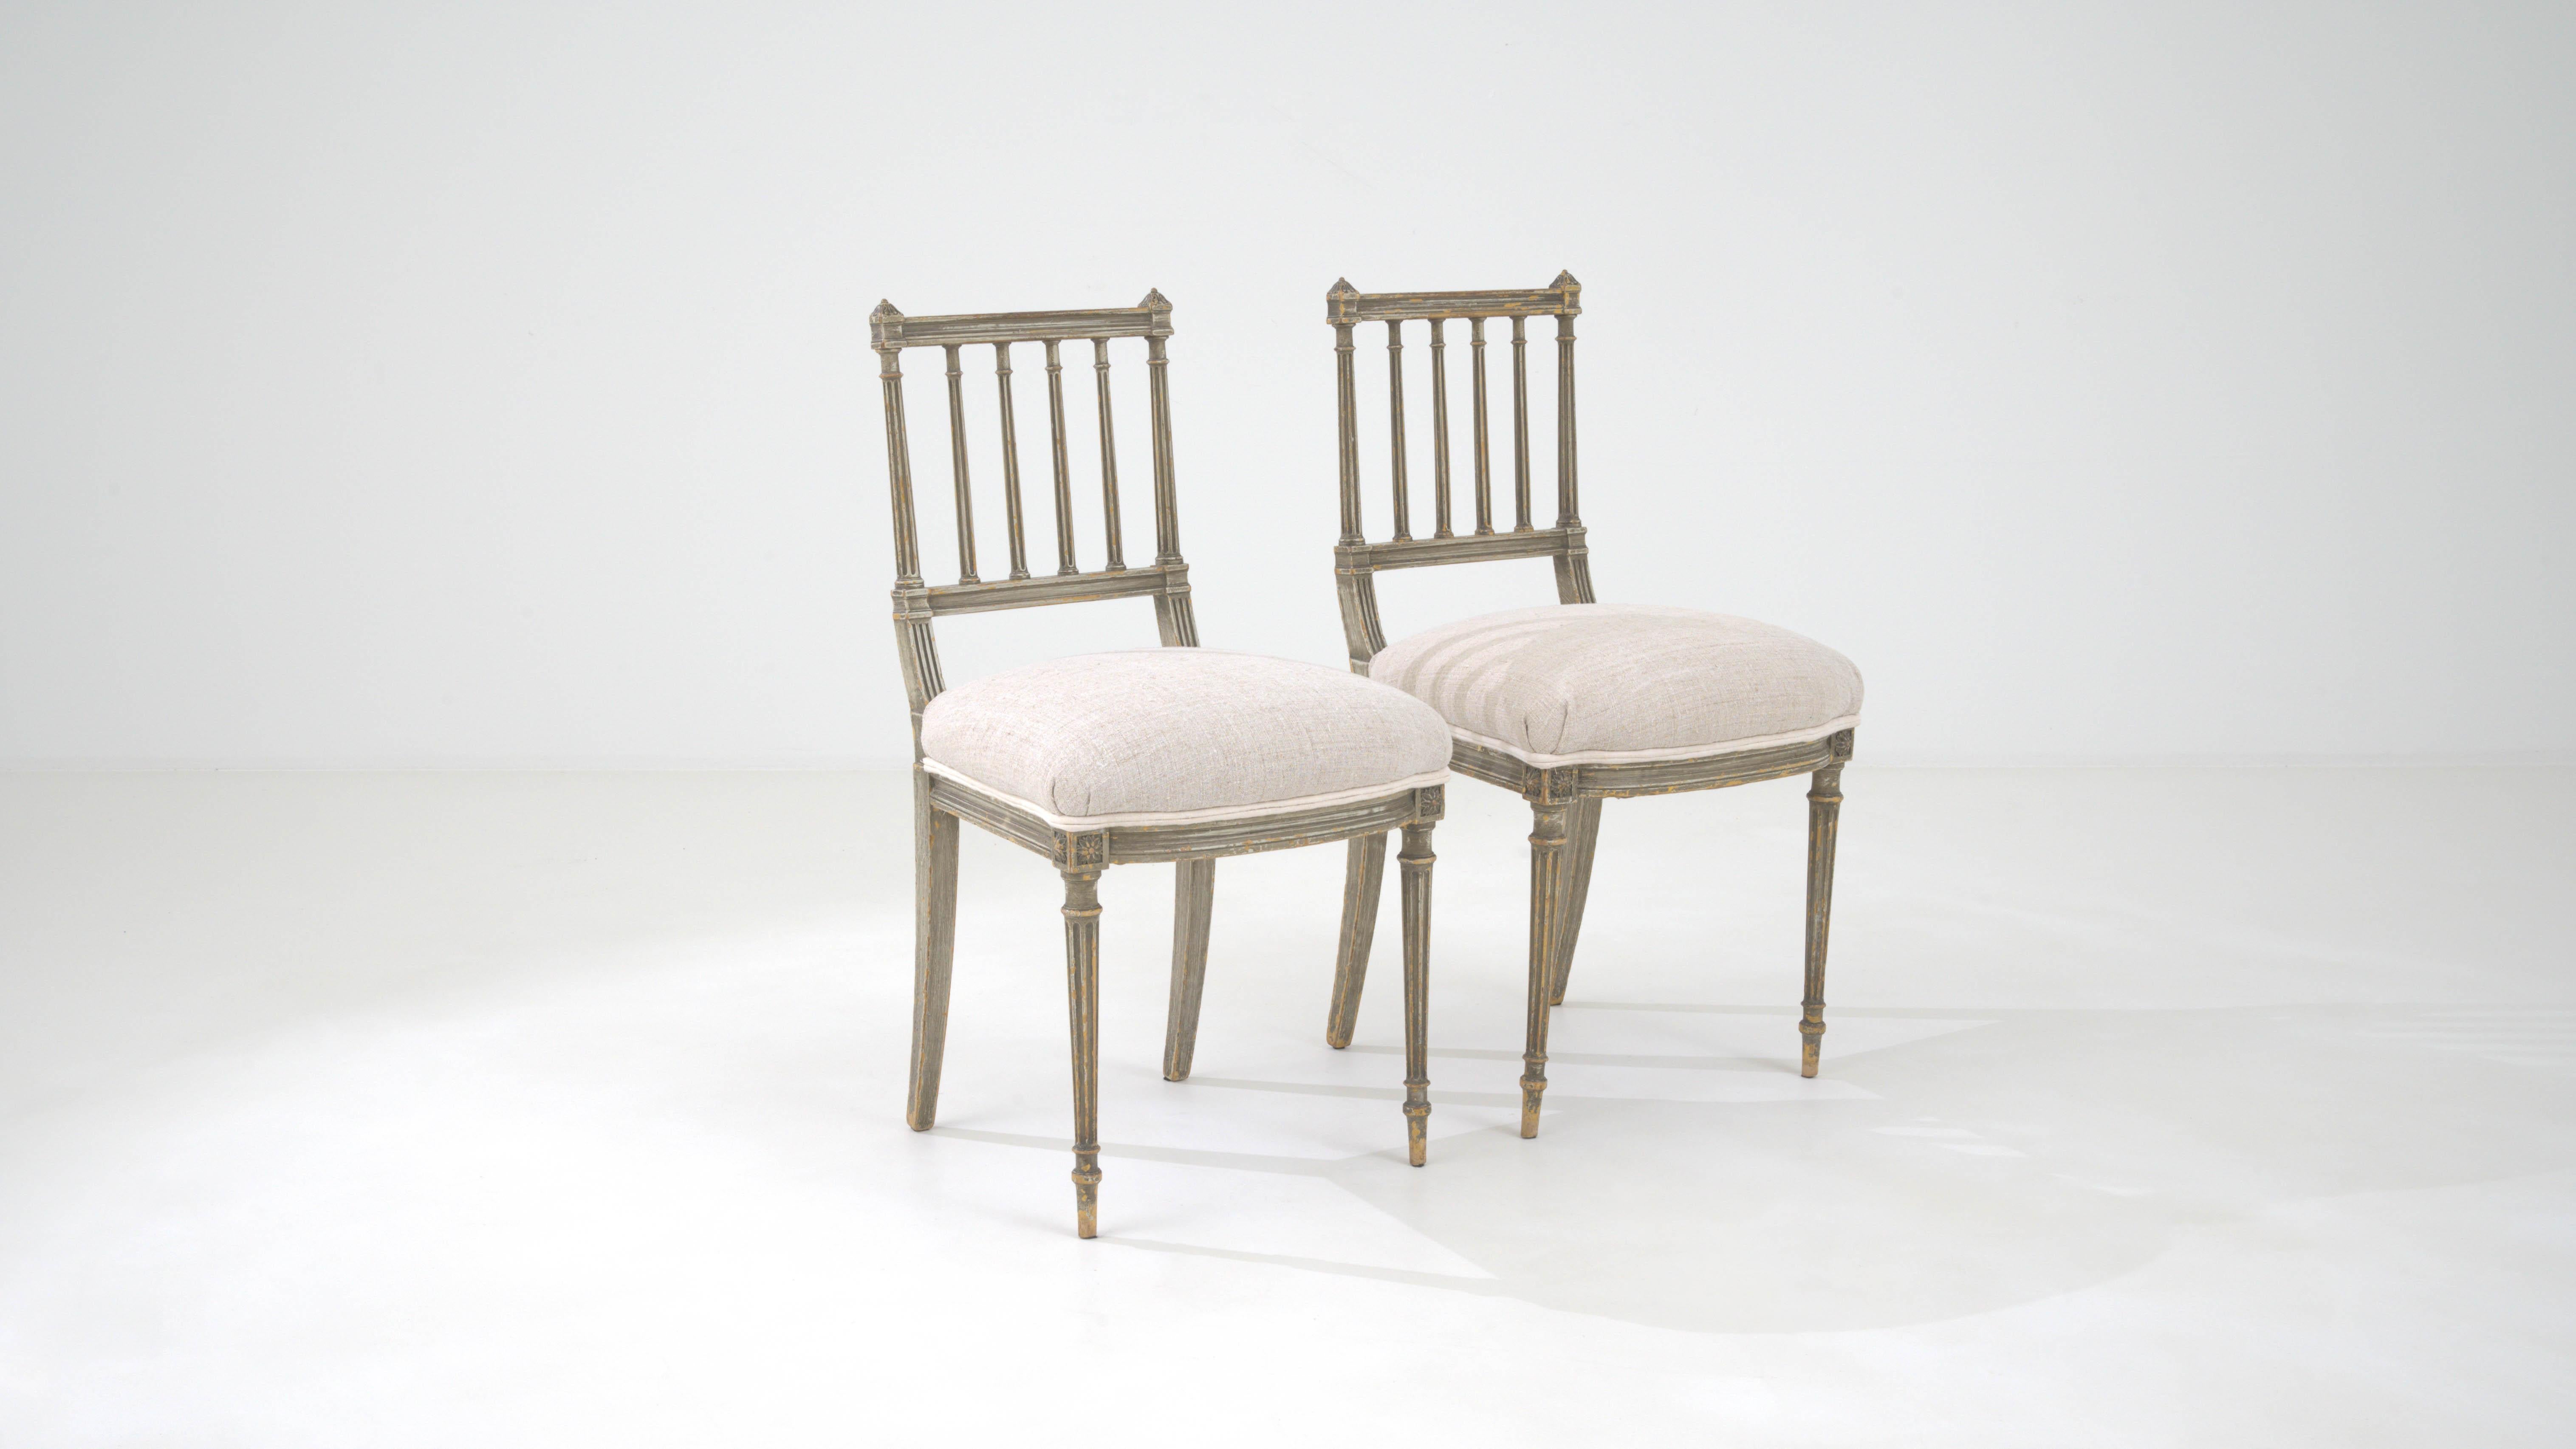 1880s French Pair Of Dining Chairs With Upholstered Seats 4